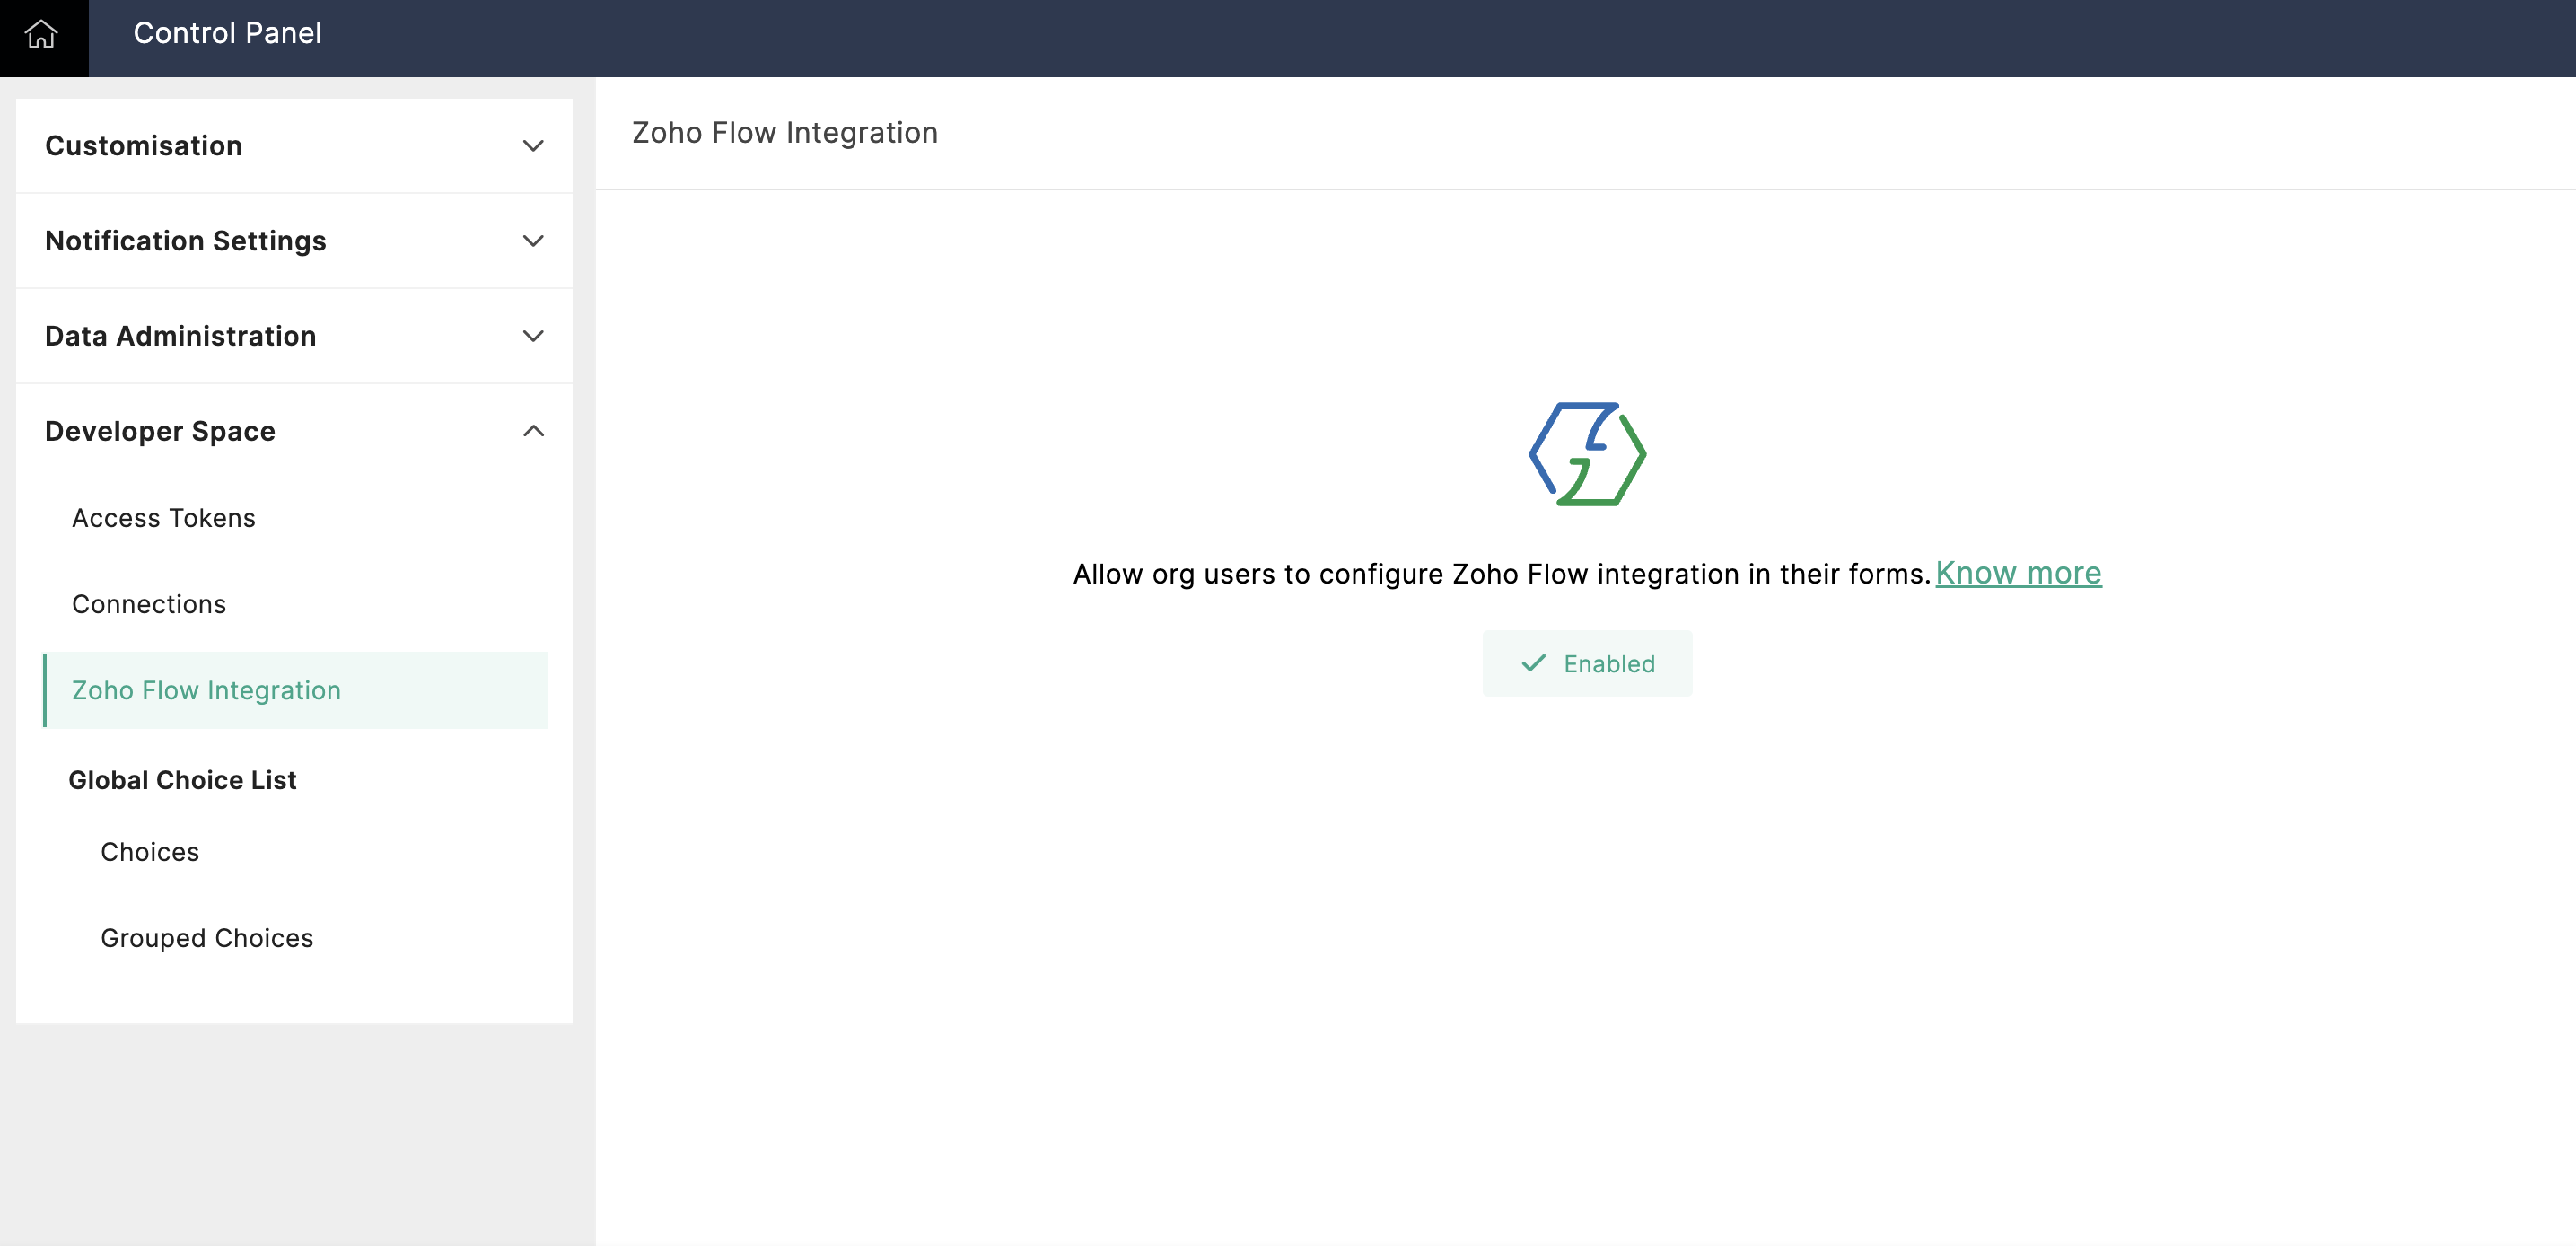 Enable Zoho Flow Integration